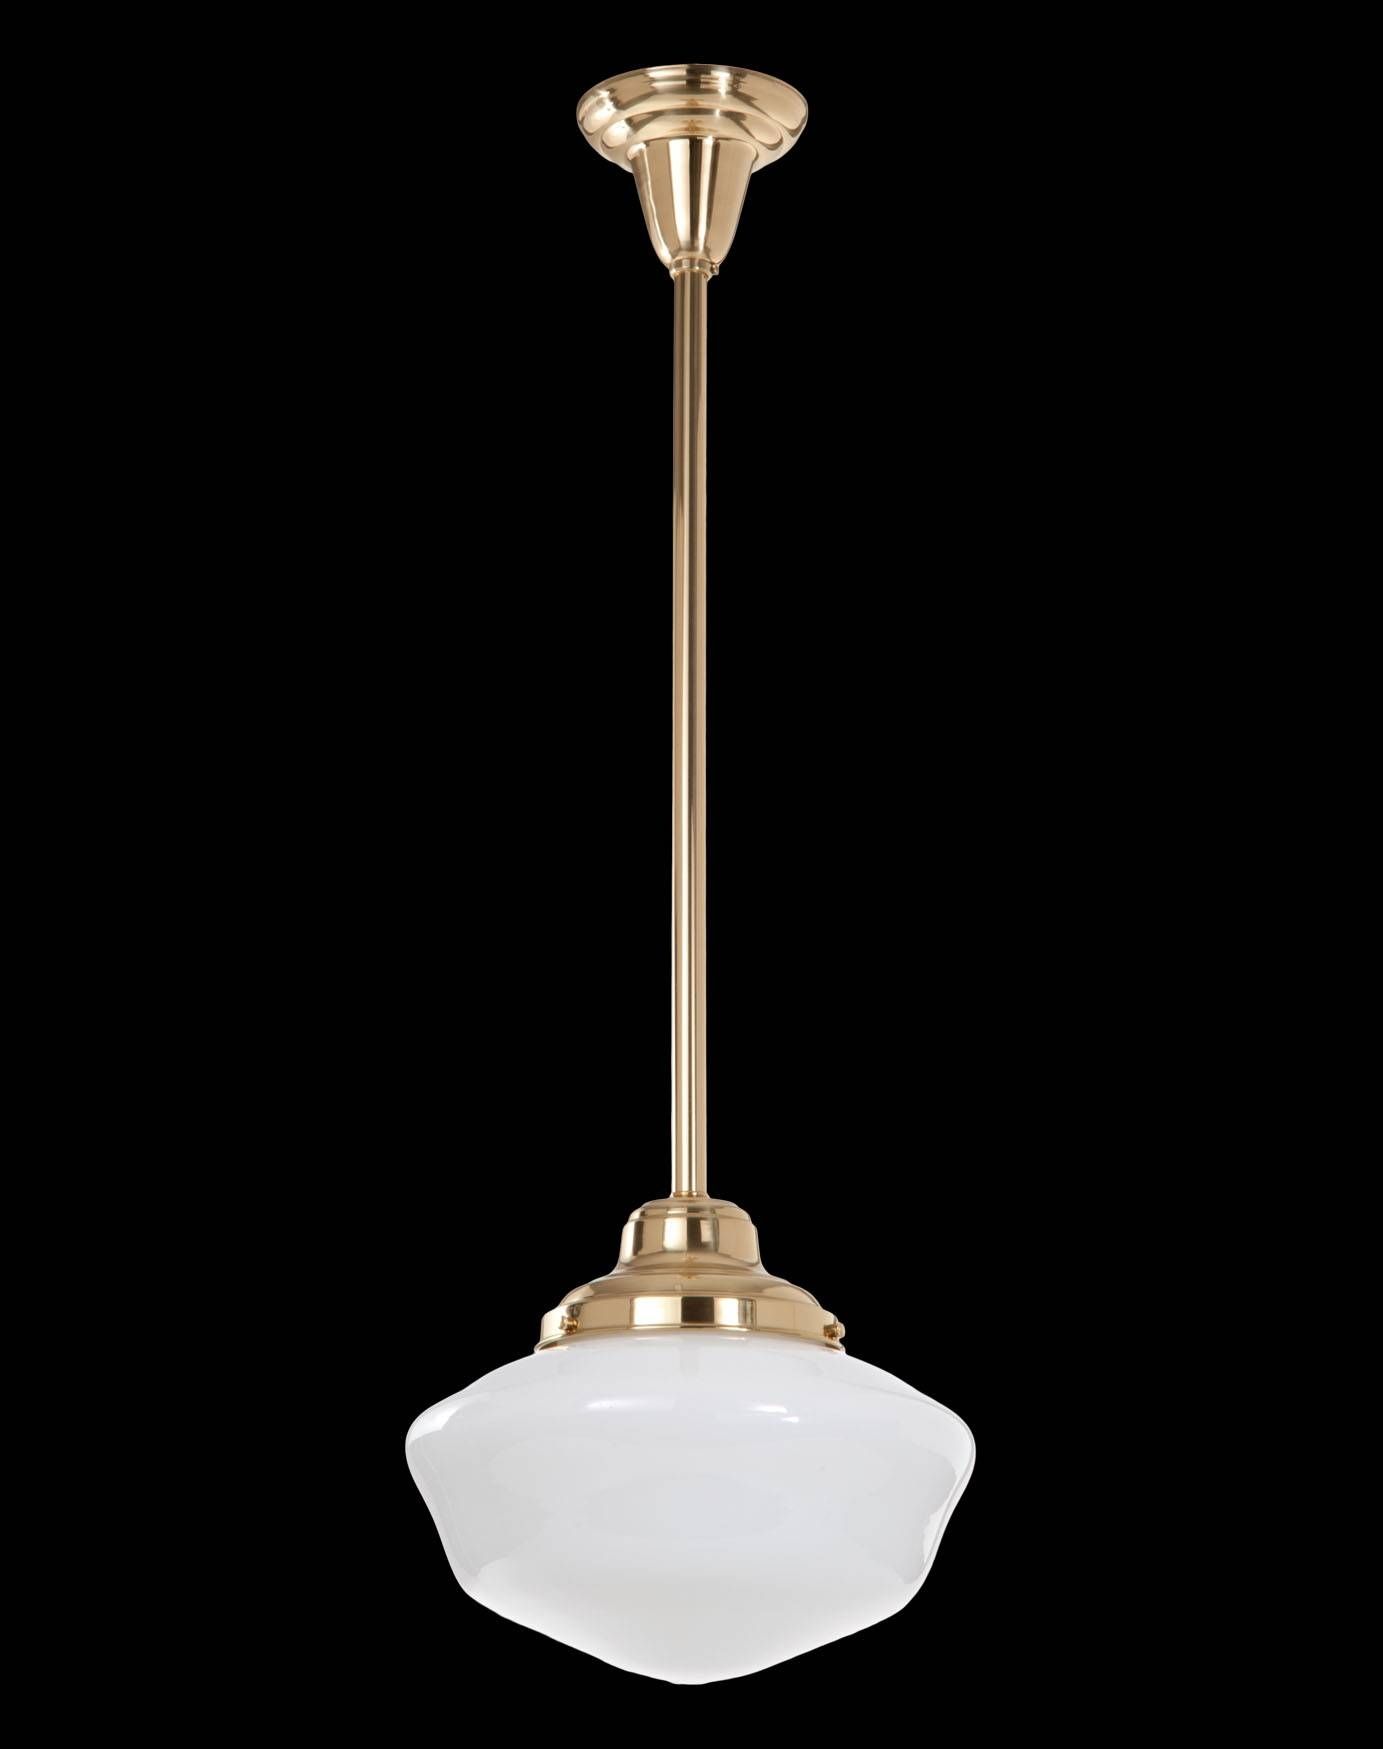 Inspirational Victorian Pendant Lighting 61 For Your Ceiling Fans Pertaining To Victorian Pendant Lights (Photo 6 of 15)